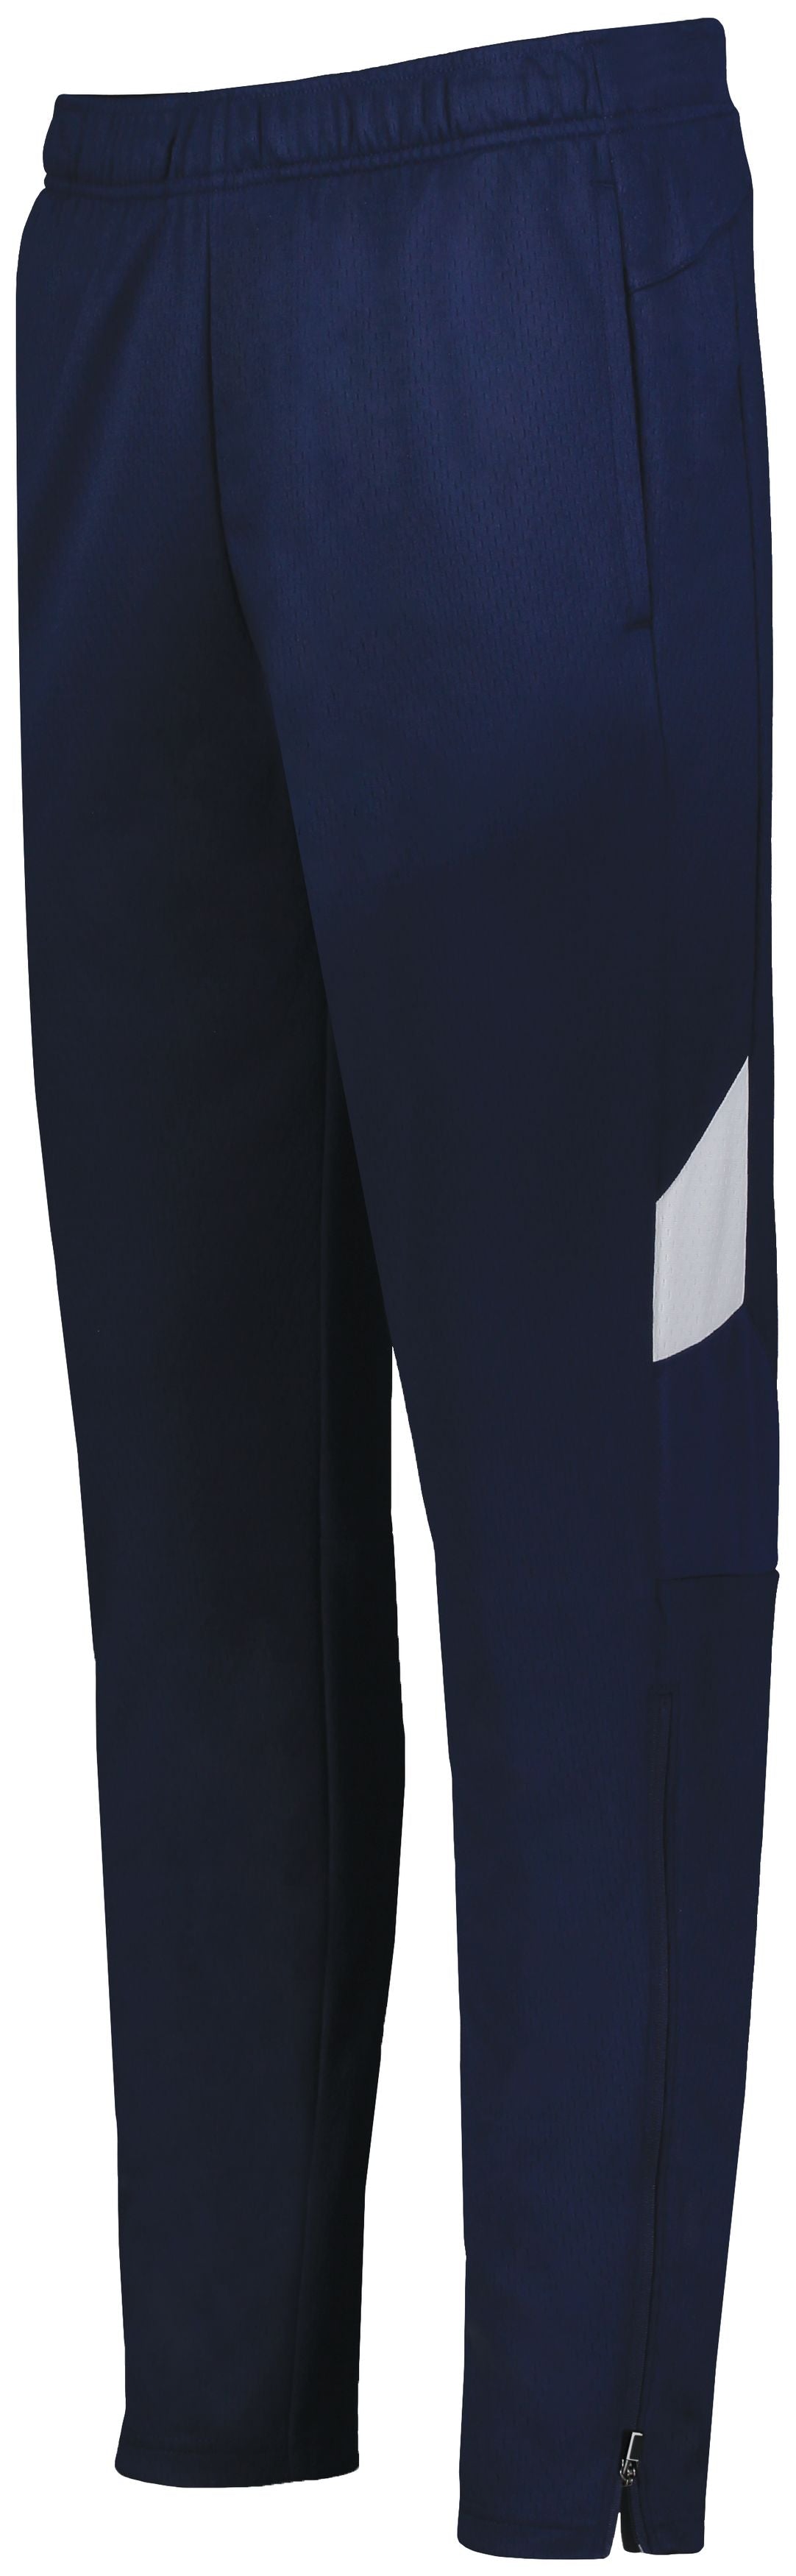 Youth Limitless Pant - 229680